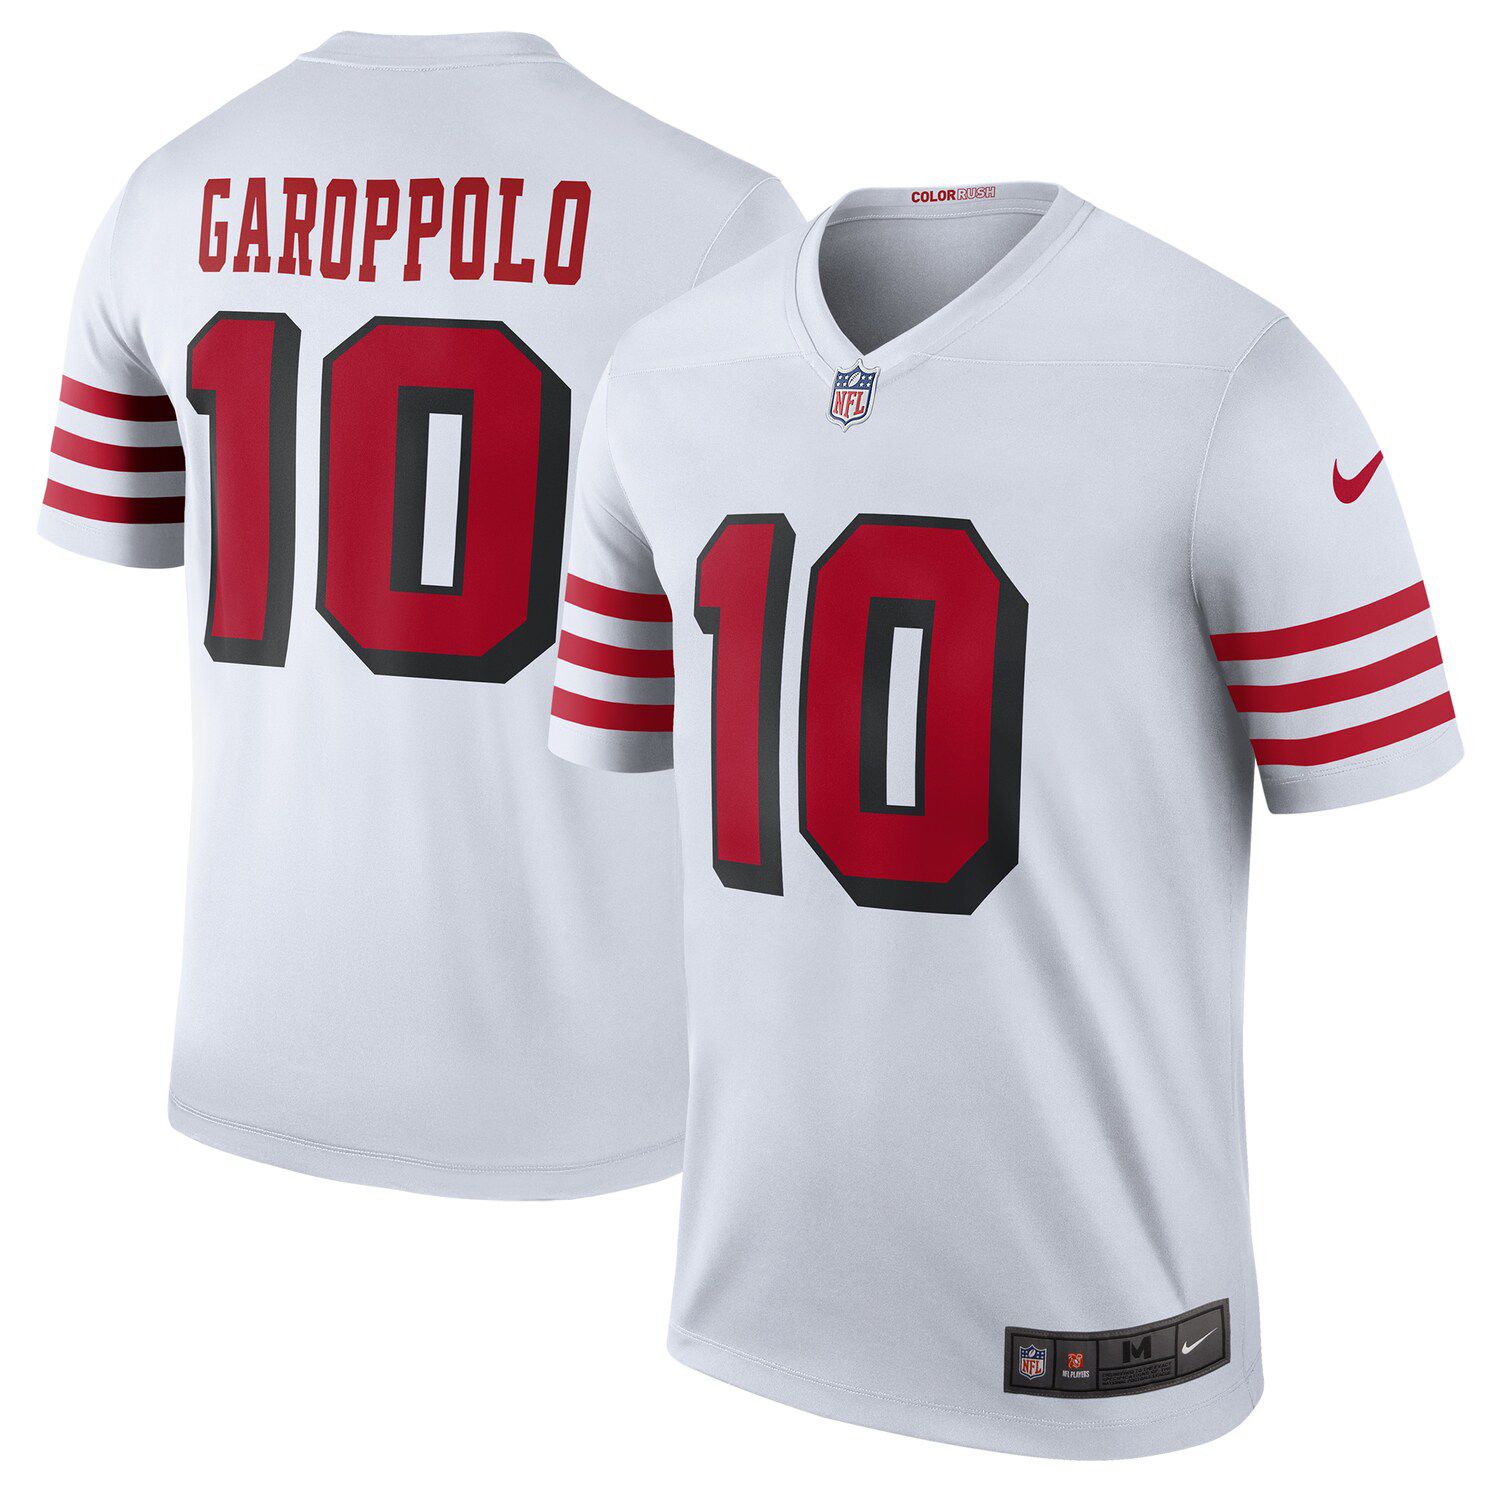 49ers color rush jersey